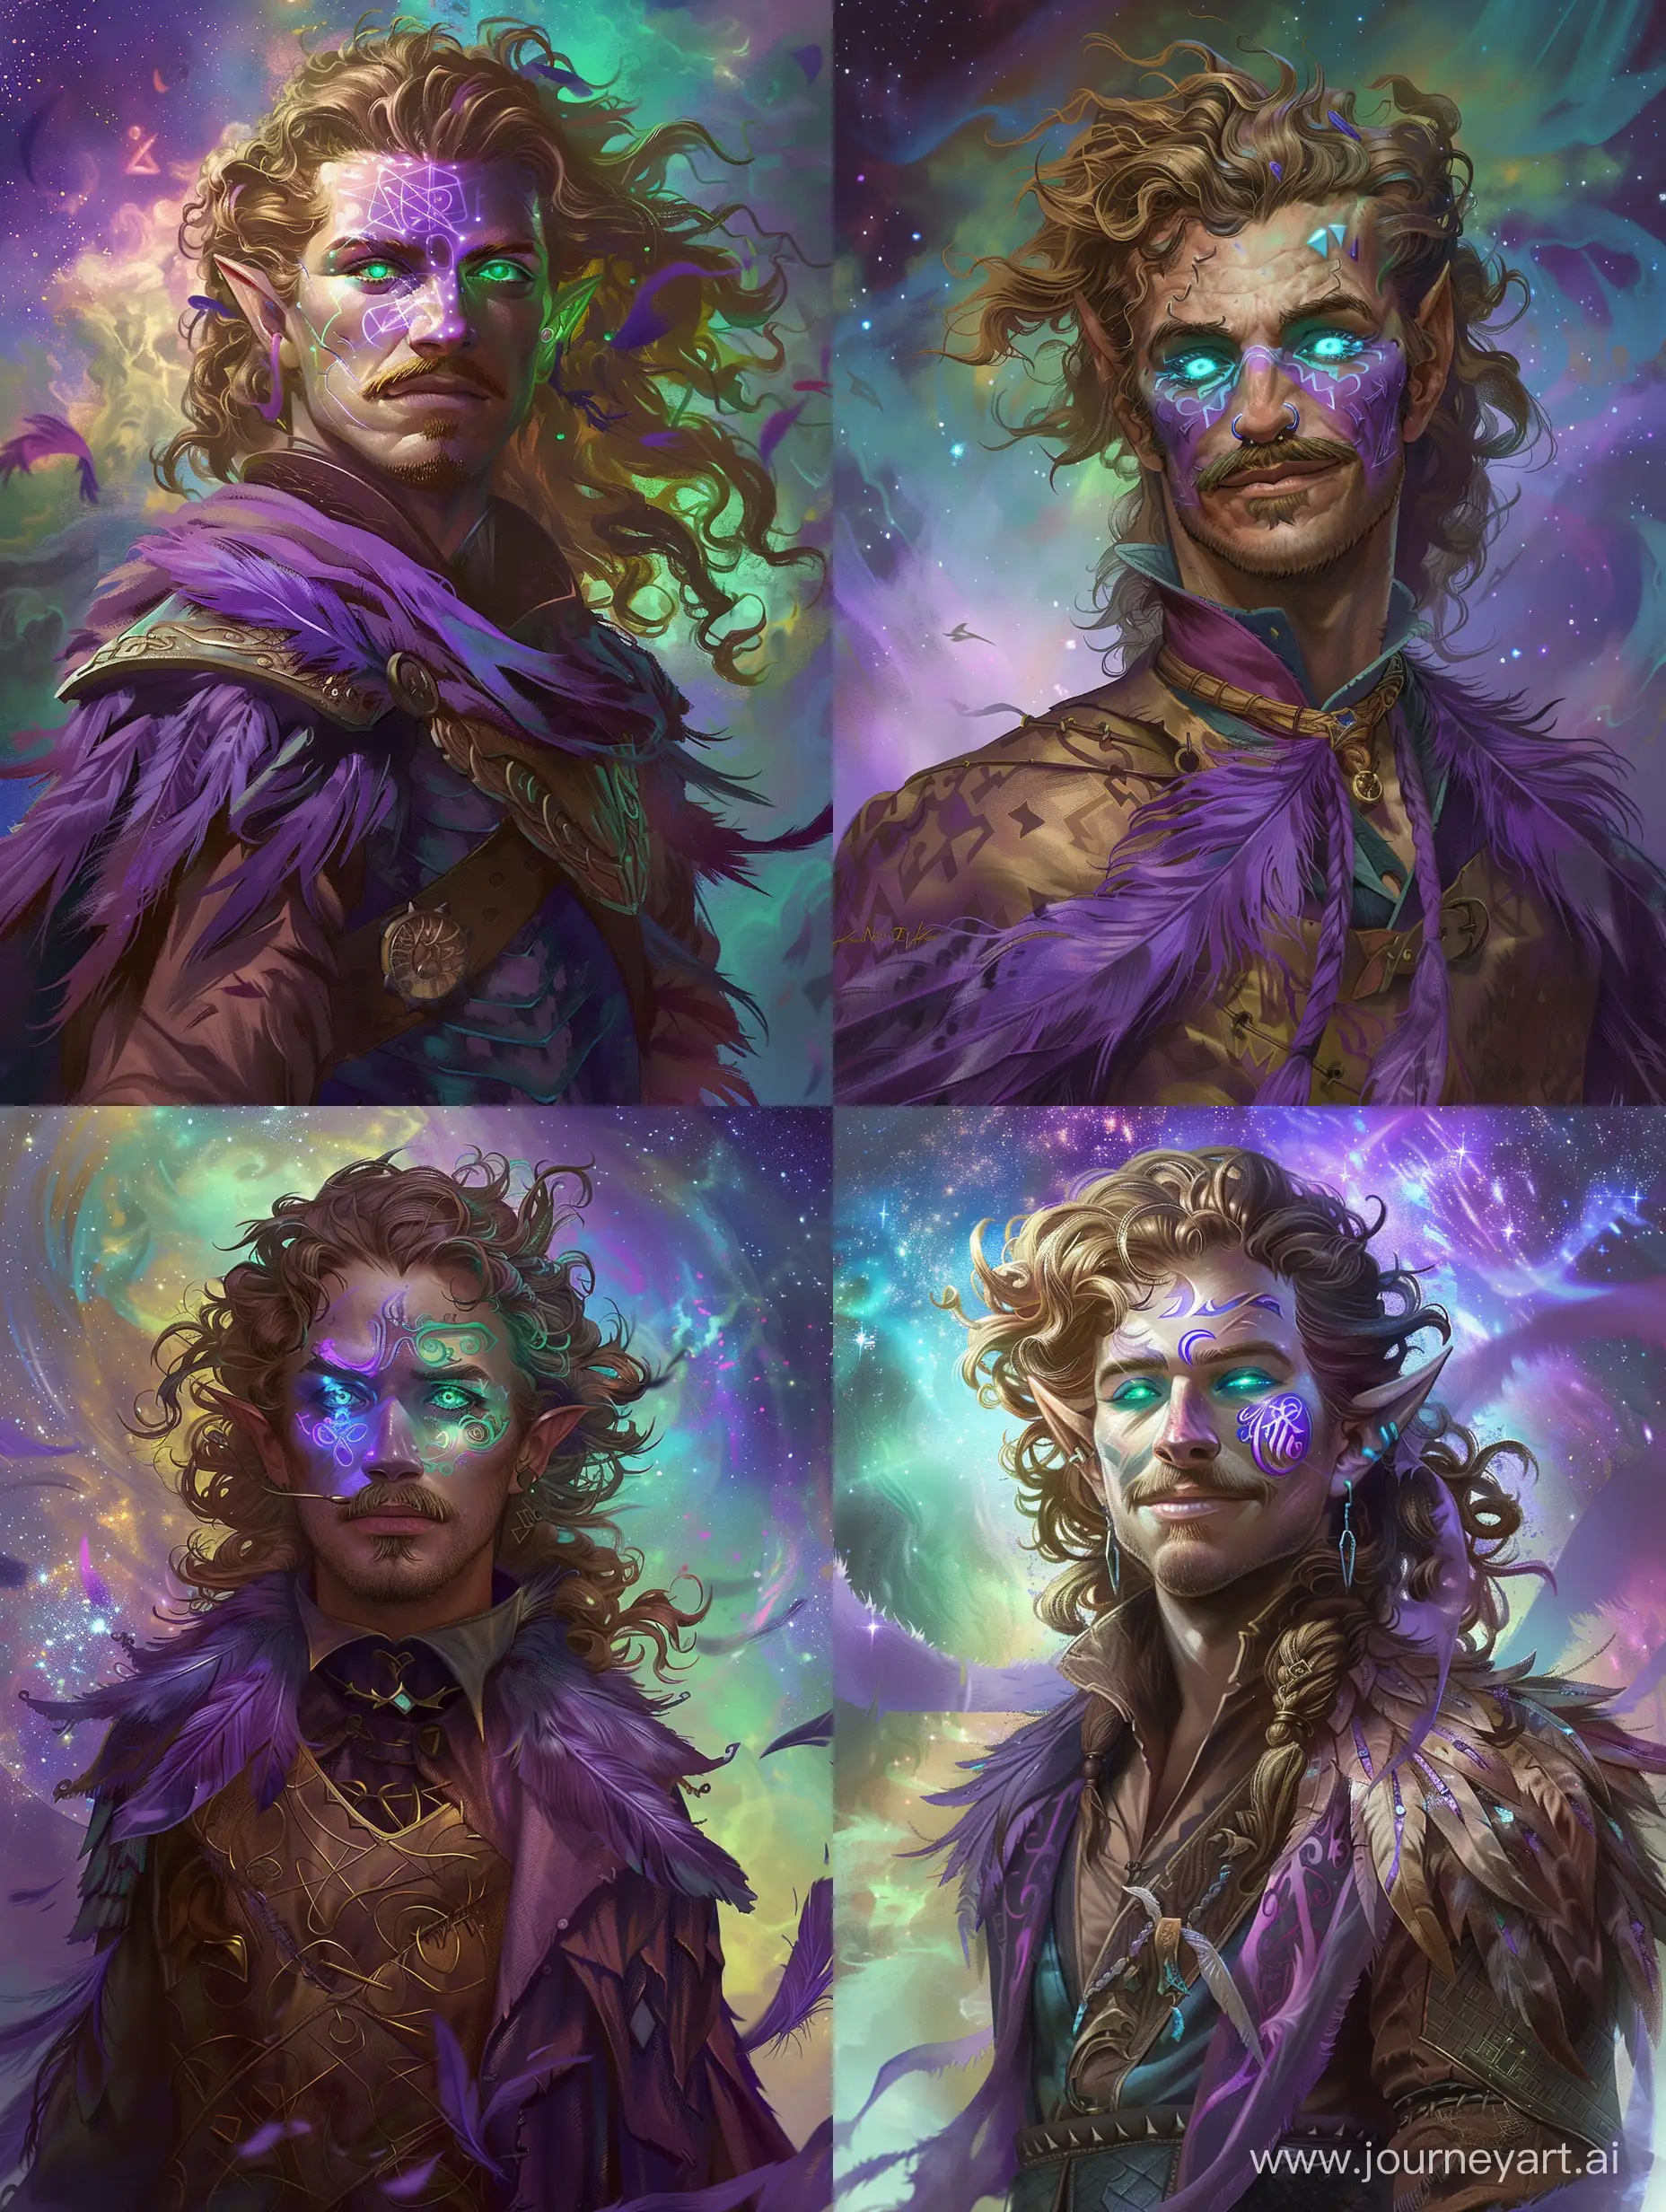 dnd character a human race male sorcerer standing in full height art, mid fit physique, straight button nose with a wide nasal bridge and upturned wide point, blue-green colour mixed oval glowing eyes, angled eyebrows, short mouth, ears not seen under hair, mid set cheekbones, oval headshape, long loose curly light-brown hair flowing on the wind with small parts of it tied in braids, bristly mustache, sarcastic smirk face expression, purple clear accurately done facepaint fully covering left eye smoothly transitioning into magical runes on his cheekbone, wearing tevinter like rich purple coloured feathered mage robes, wearing nose piecring, pathfinder character portrait artstyle, cosmic background with a mix of purple, blue, green and yellow colours